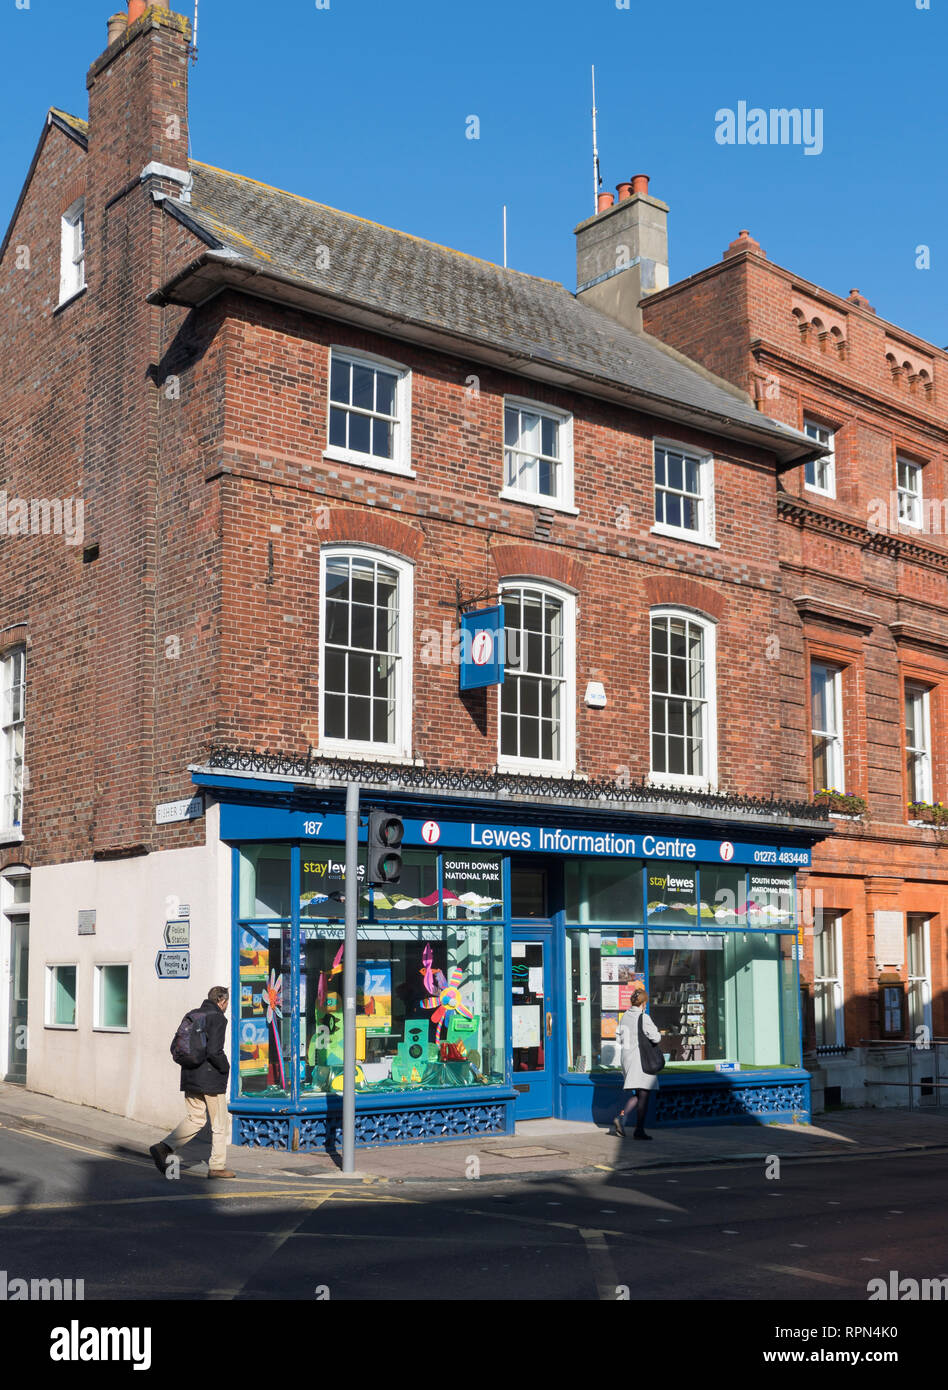 Lewes Tourist Information Center Shop in Lewes, East Sussex, England, UK. Stockfoto